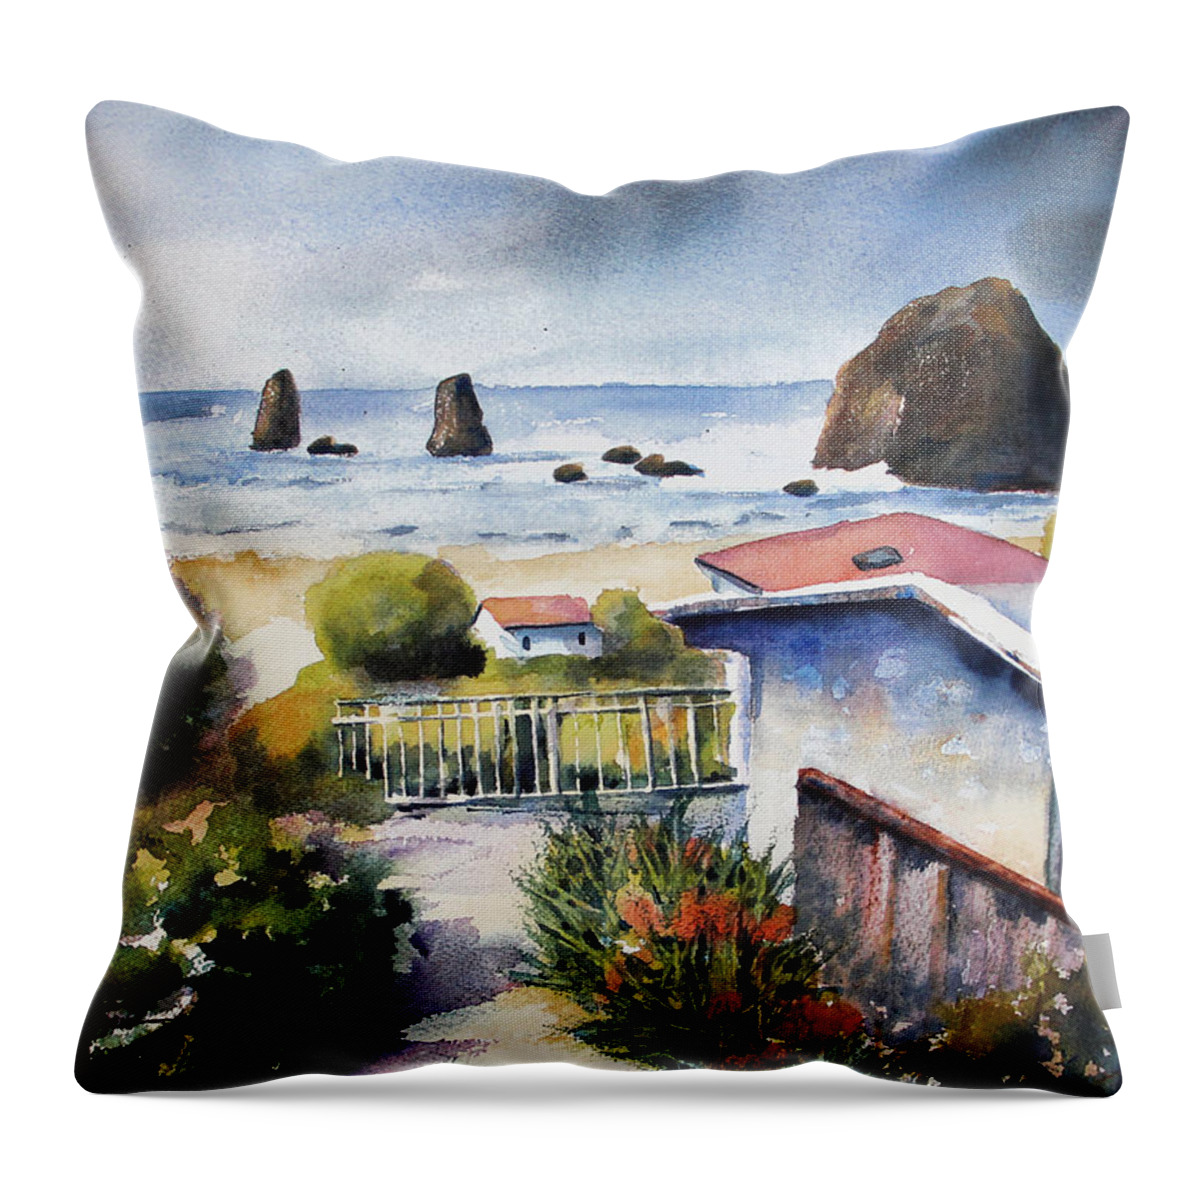 Cannon Beach Throw Pillow featuring the painting Cannon Beach Cottage by Marti Green